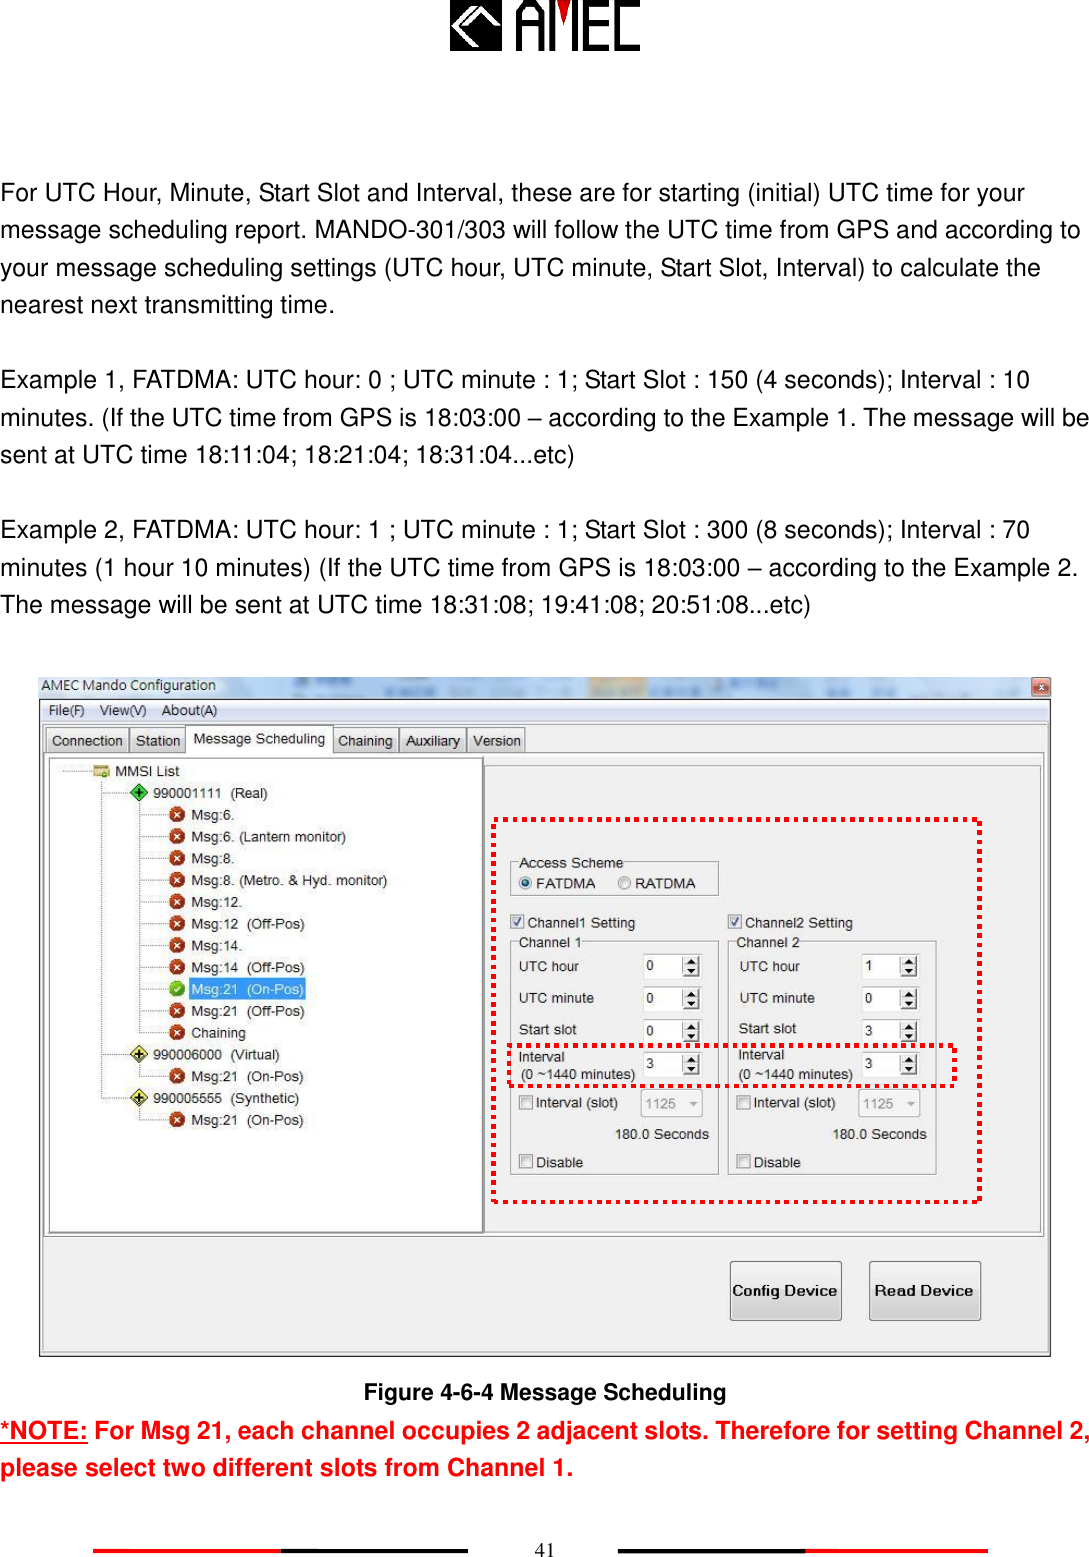    41   For UTC Hour, Minute, Start Slot and Interval, these are for starting (initial) UTC time for your message scheduling report. MANDO-301/303 will follow the UTC time from GPS and according to your message scheduling settings (UTC hour, UTC minute, Start Slot, Interval) to calculate the nearest next transmitting time.    Example 1, FATDMA: UTC hour: 0 ; UTC minute : 1; Start Slot : 150 (4 seconds); Interval : 10 minutes. (If the UTC time from GPS is 18:03:00 – according to the Example 1. The message will be sent at UTC time 18:11:04; 18:21:04; 18:31:04...etc)  Example 2, FATDMA: UTC hour: 1 ; UTC minute : 1; Start Slot : 300 (8 seconds); Interval : 70 minutes (1 hour 10 minutes) (If the UTC time from GPS is 18:03:00 – according to the Example 2. The message will be sent at UTC time 18:31:08; 19:41:08; 20:51:08...etc)   Figure 4-6-4 Message Scheduling *NOTE: For Msg 21, each channel occupies 2 adjacent slots. Therefore for setting Channel 2, please select two different slots from Channel 1.   